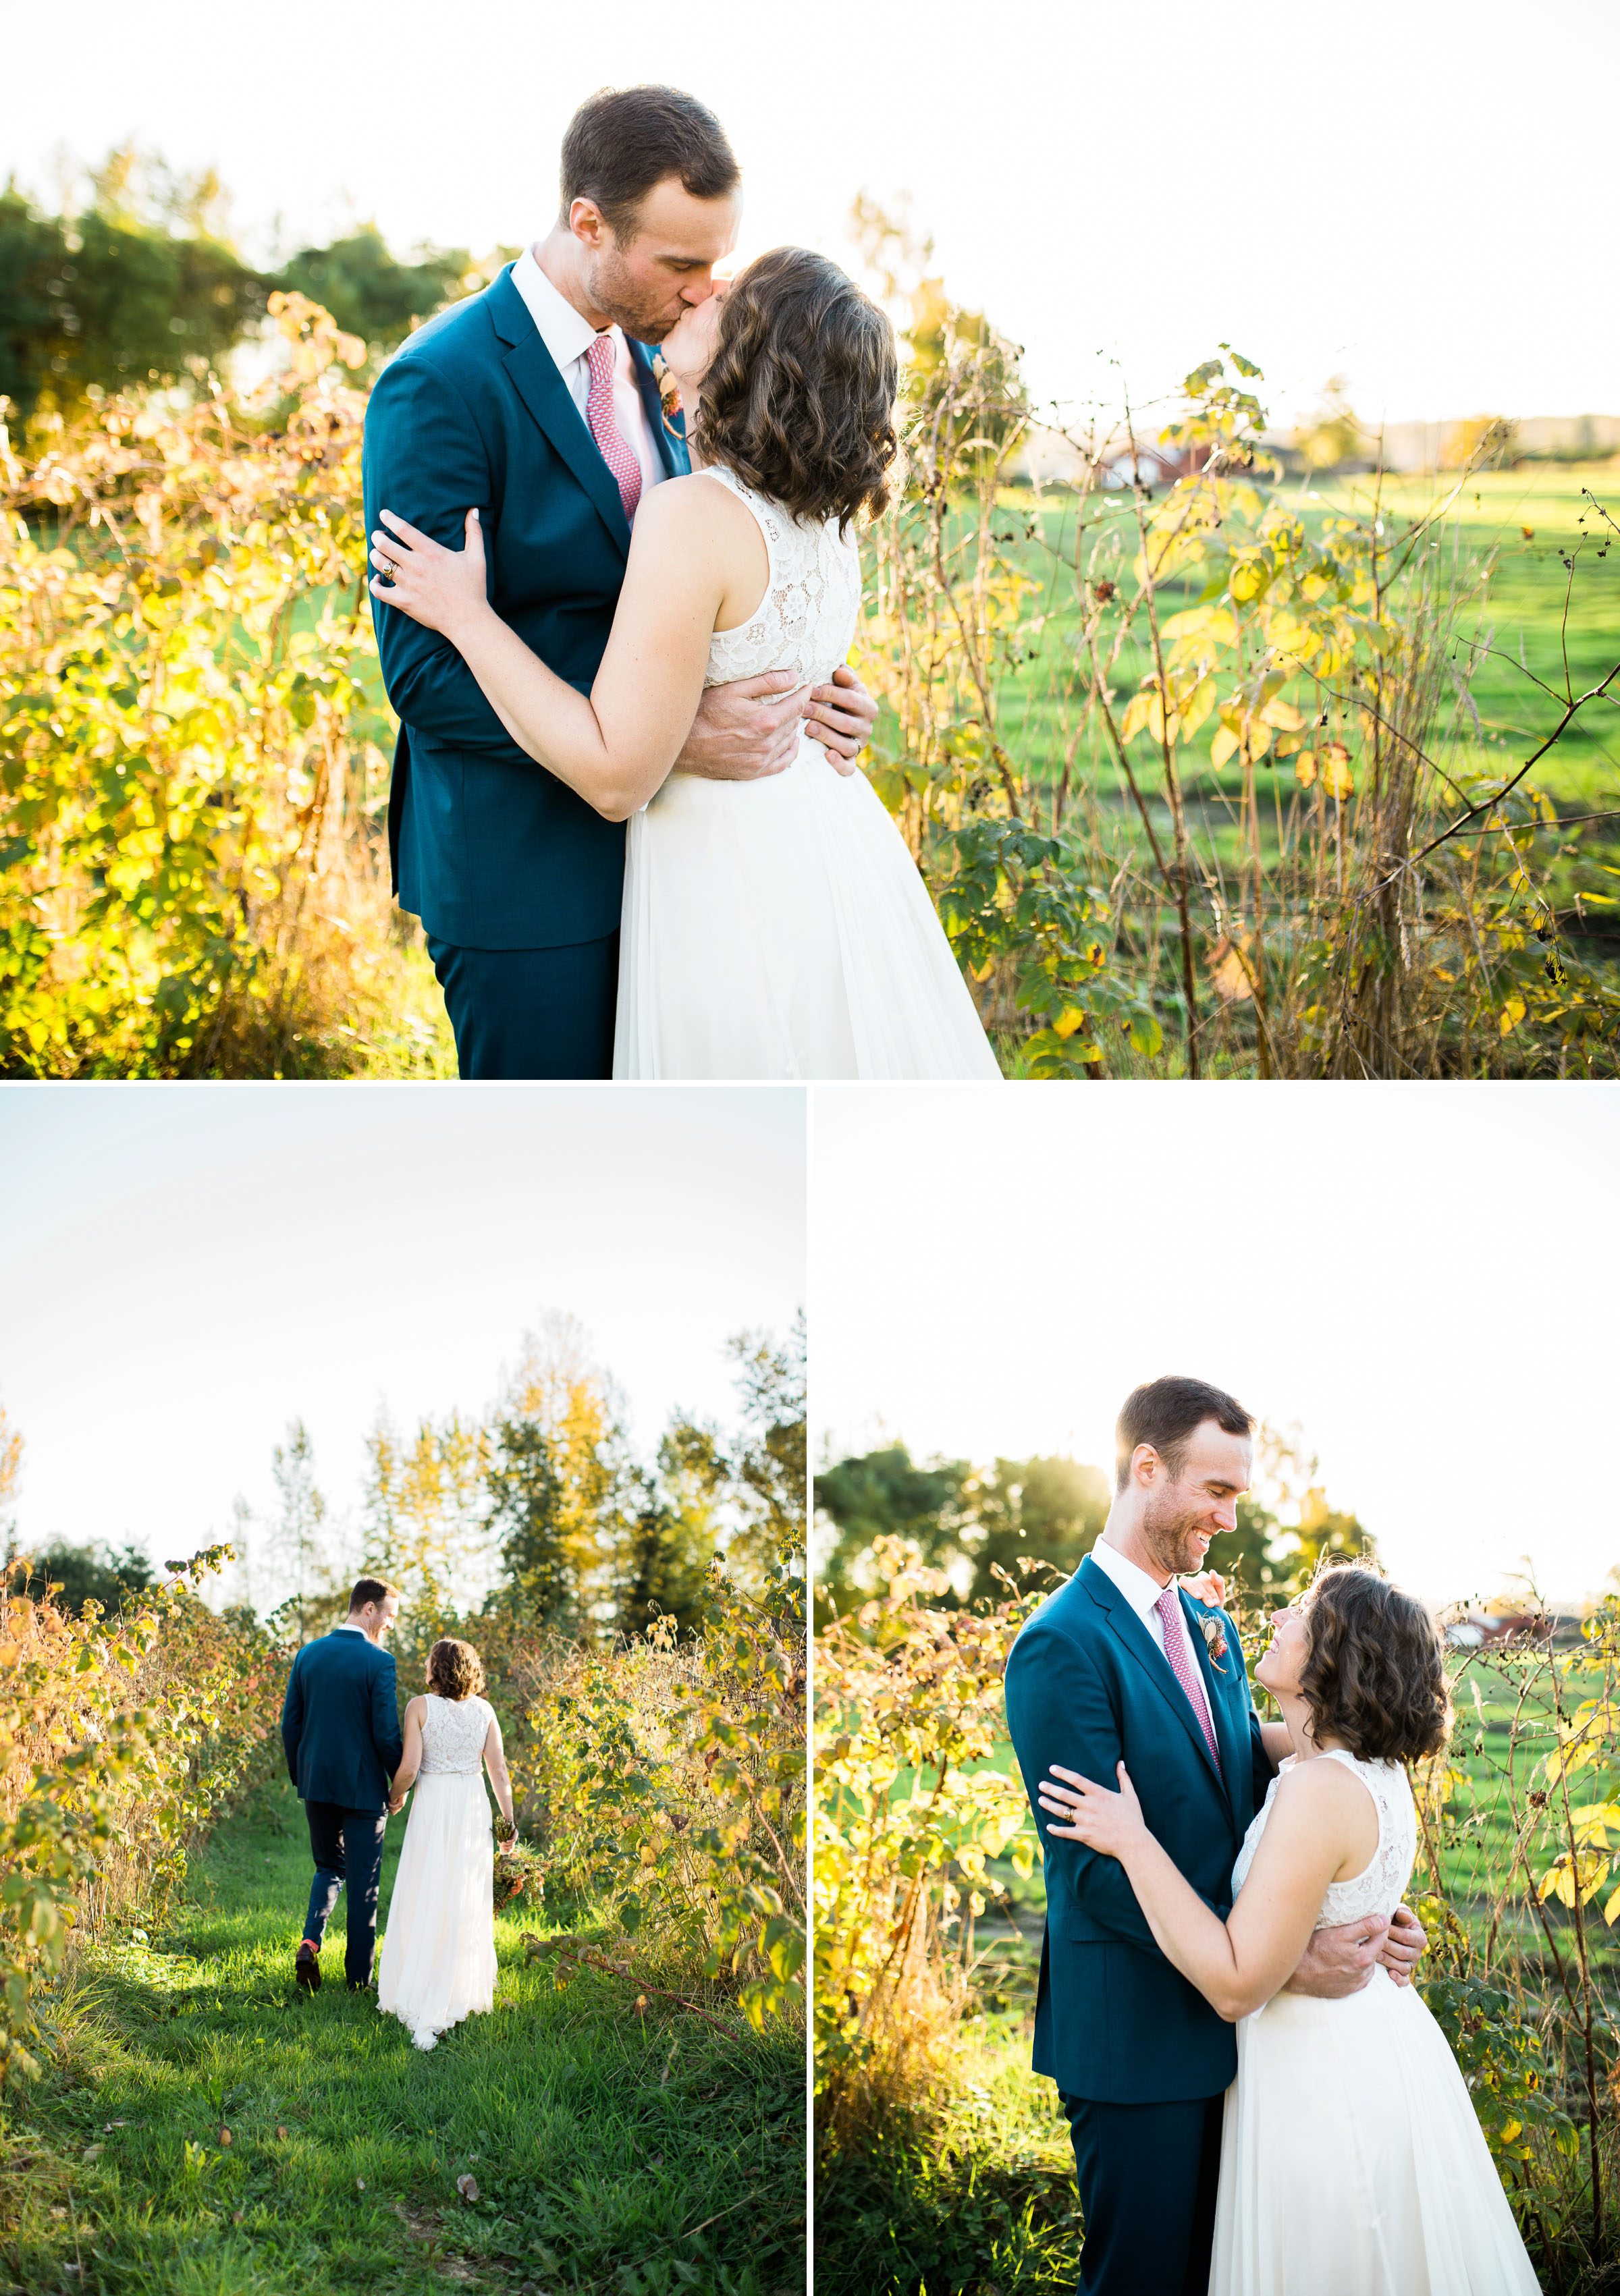 22-the-Fields-at-Willie-Greens-Wedding-Venue-Seattle-Photographer-bride-groom-sunset-portraits-Photography